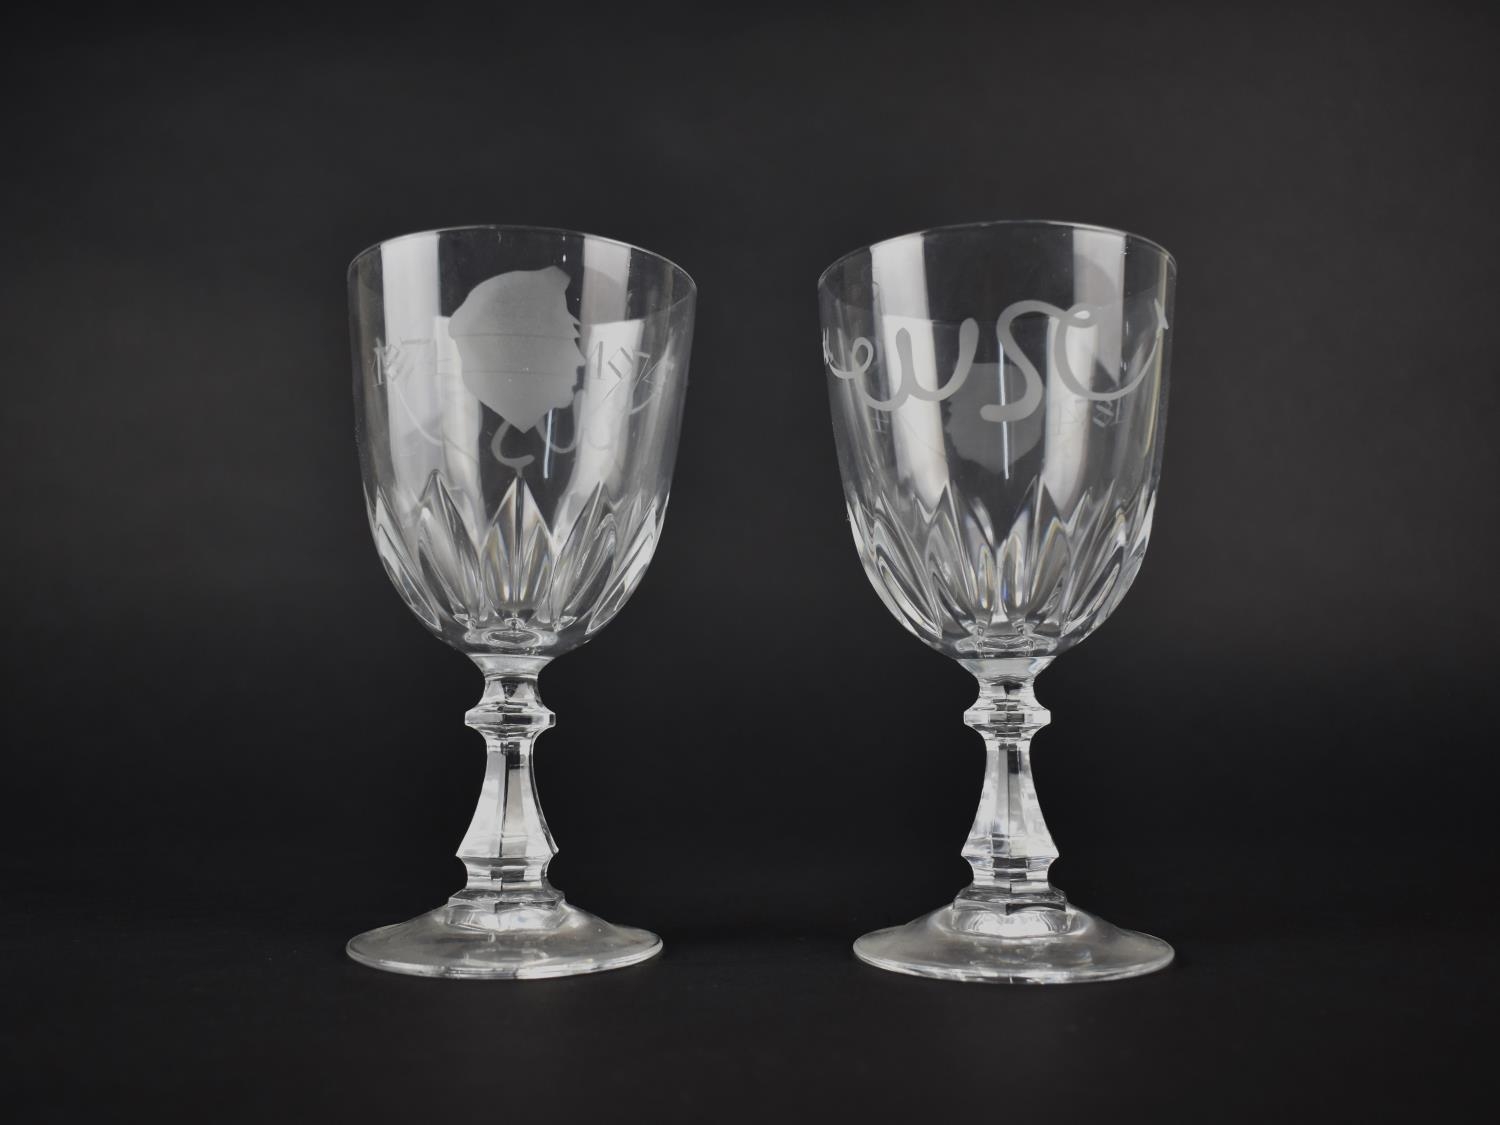 Two Limited Hand Engraved Glasses for The Churchill Centenary - 1874-1974, Together with a 1939-1945